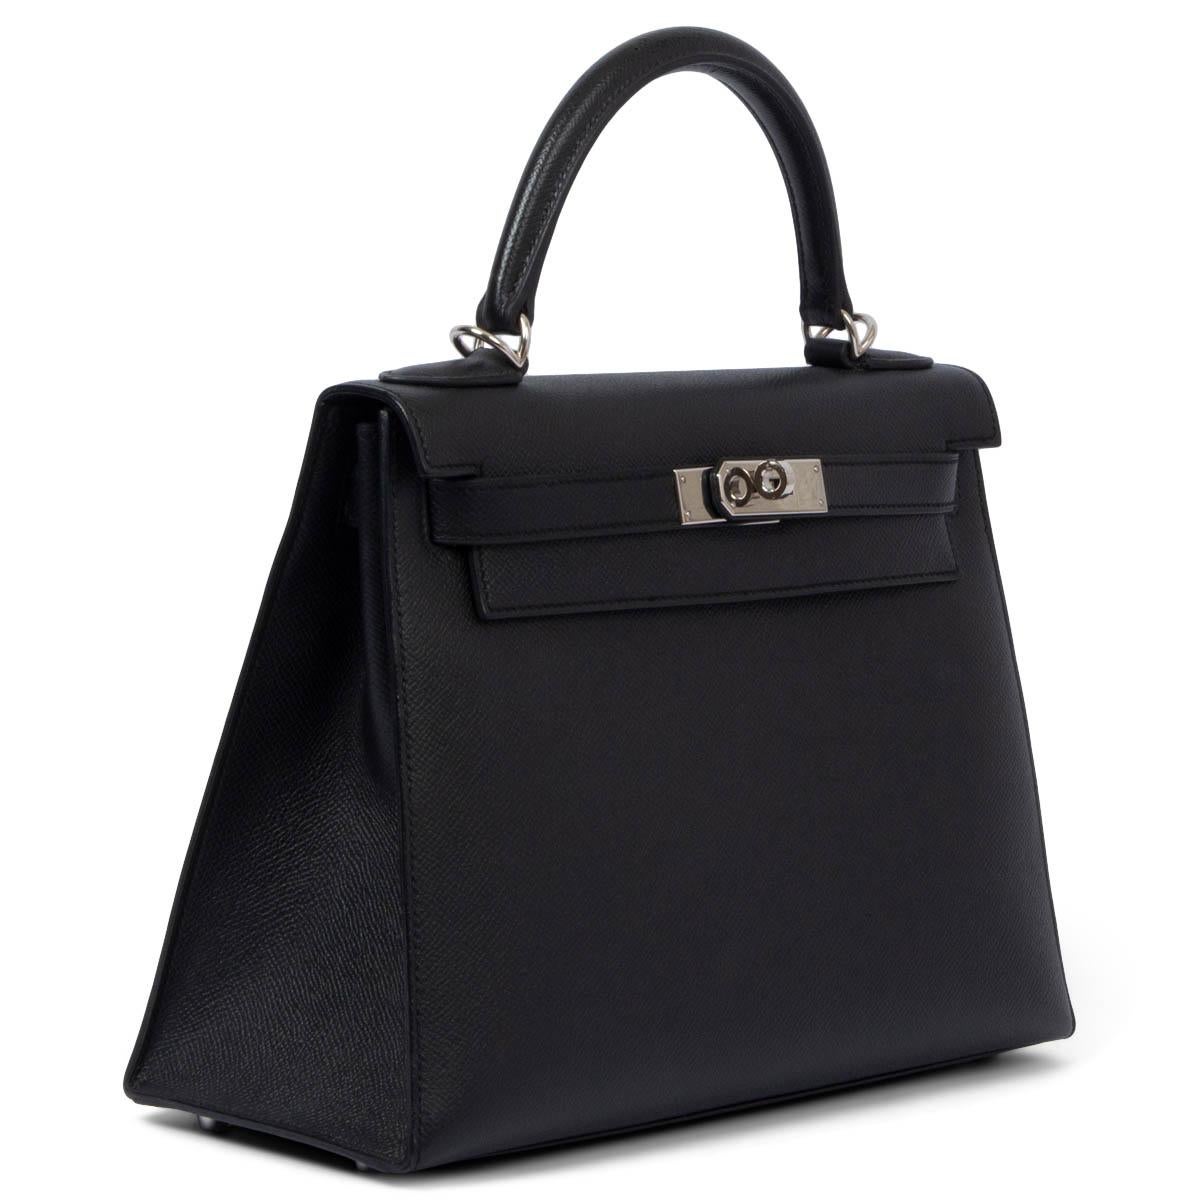 100% authentic Hermès Kelly 28 Sellier bag in black Veau Epsom featuring palladium hardware. Lined in Chevre (goat skin) with an open pocket against the front and a zipper pocket against the bag. Has been carried and has two tiny holes in the handle